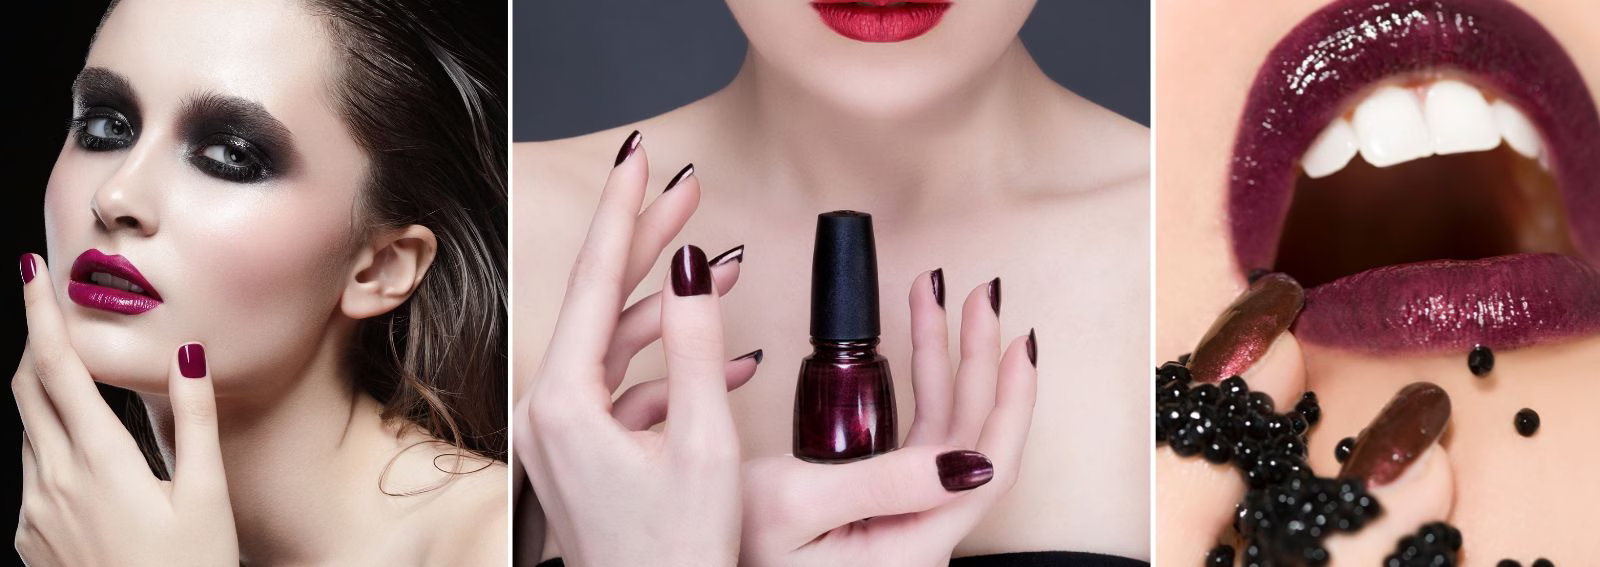 Aubergine Nail Polish Is A Soulful And Sultry Look For Fall | BEAUTY